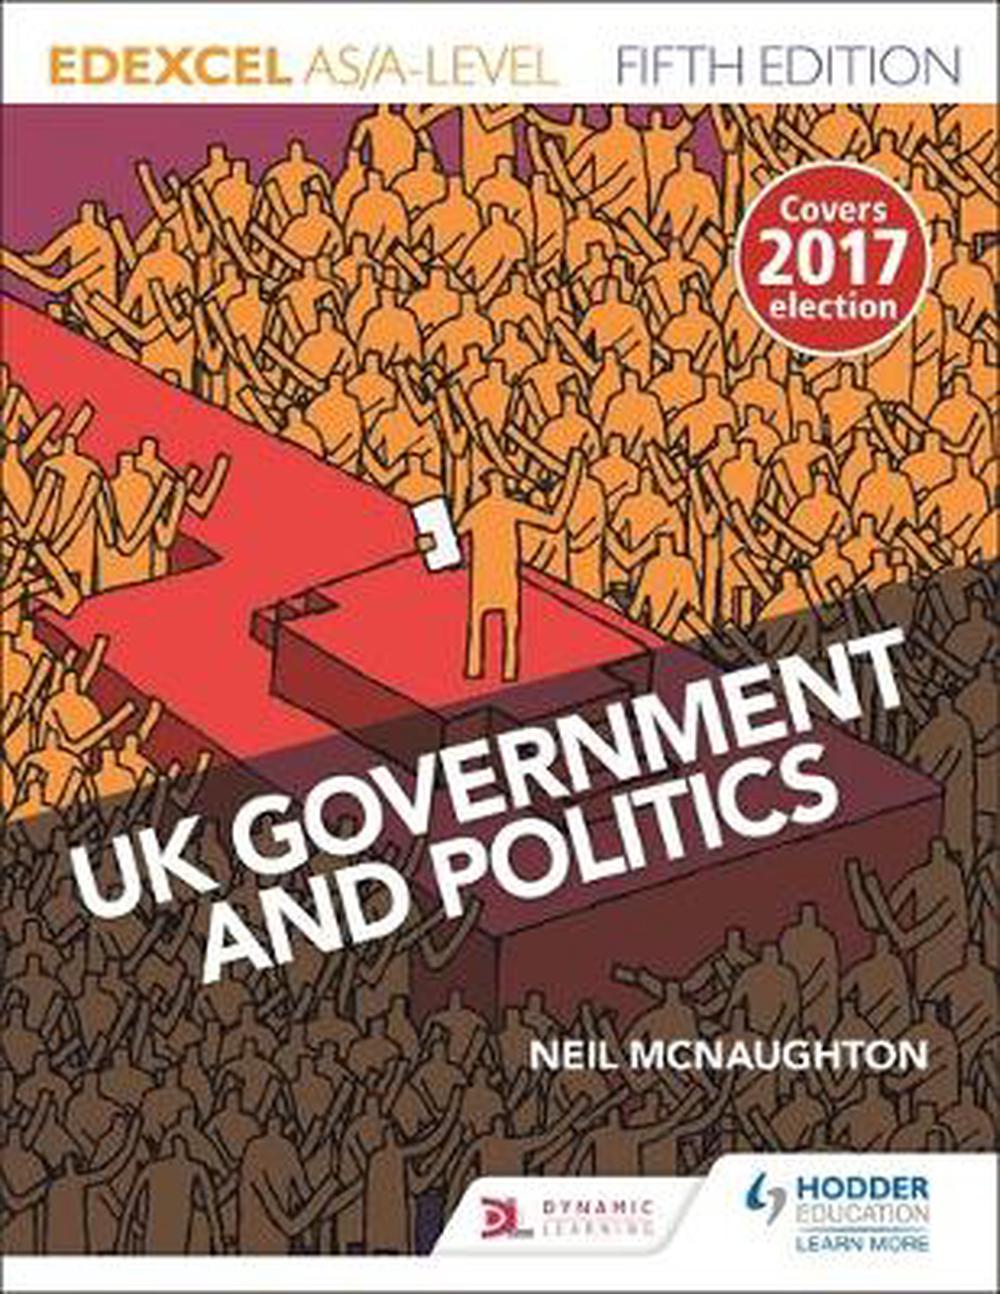 Edexcel Uk Government and Politics for As/a Level by Neil Mcnaughton